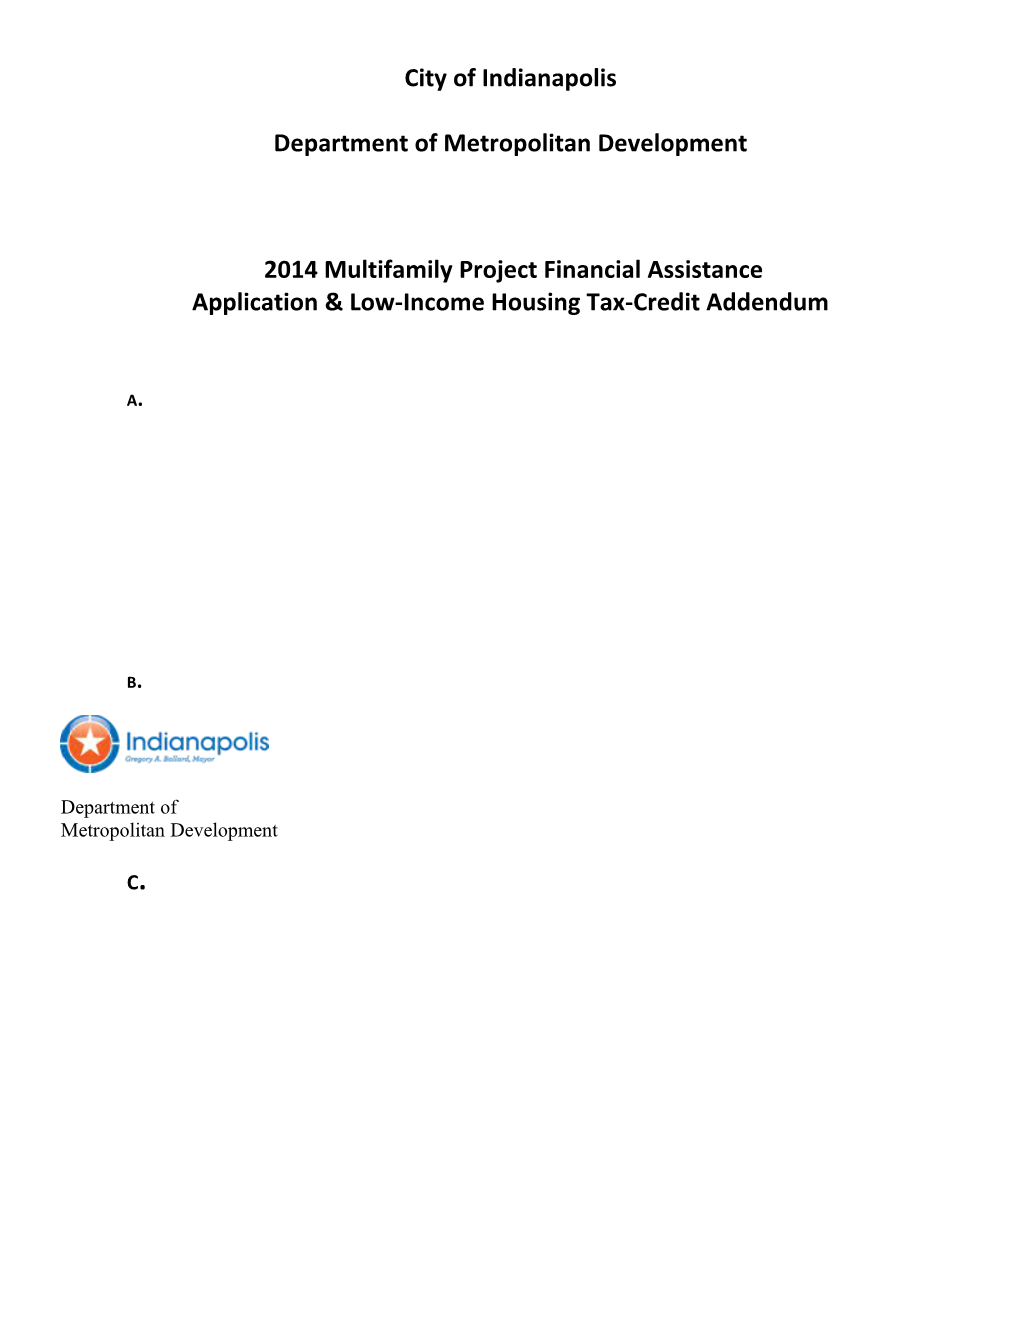 Application &Low-Income Housing Tax-Credit Addendum